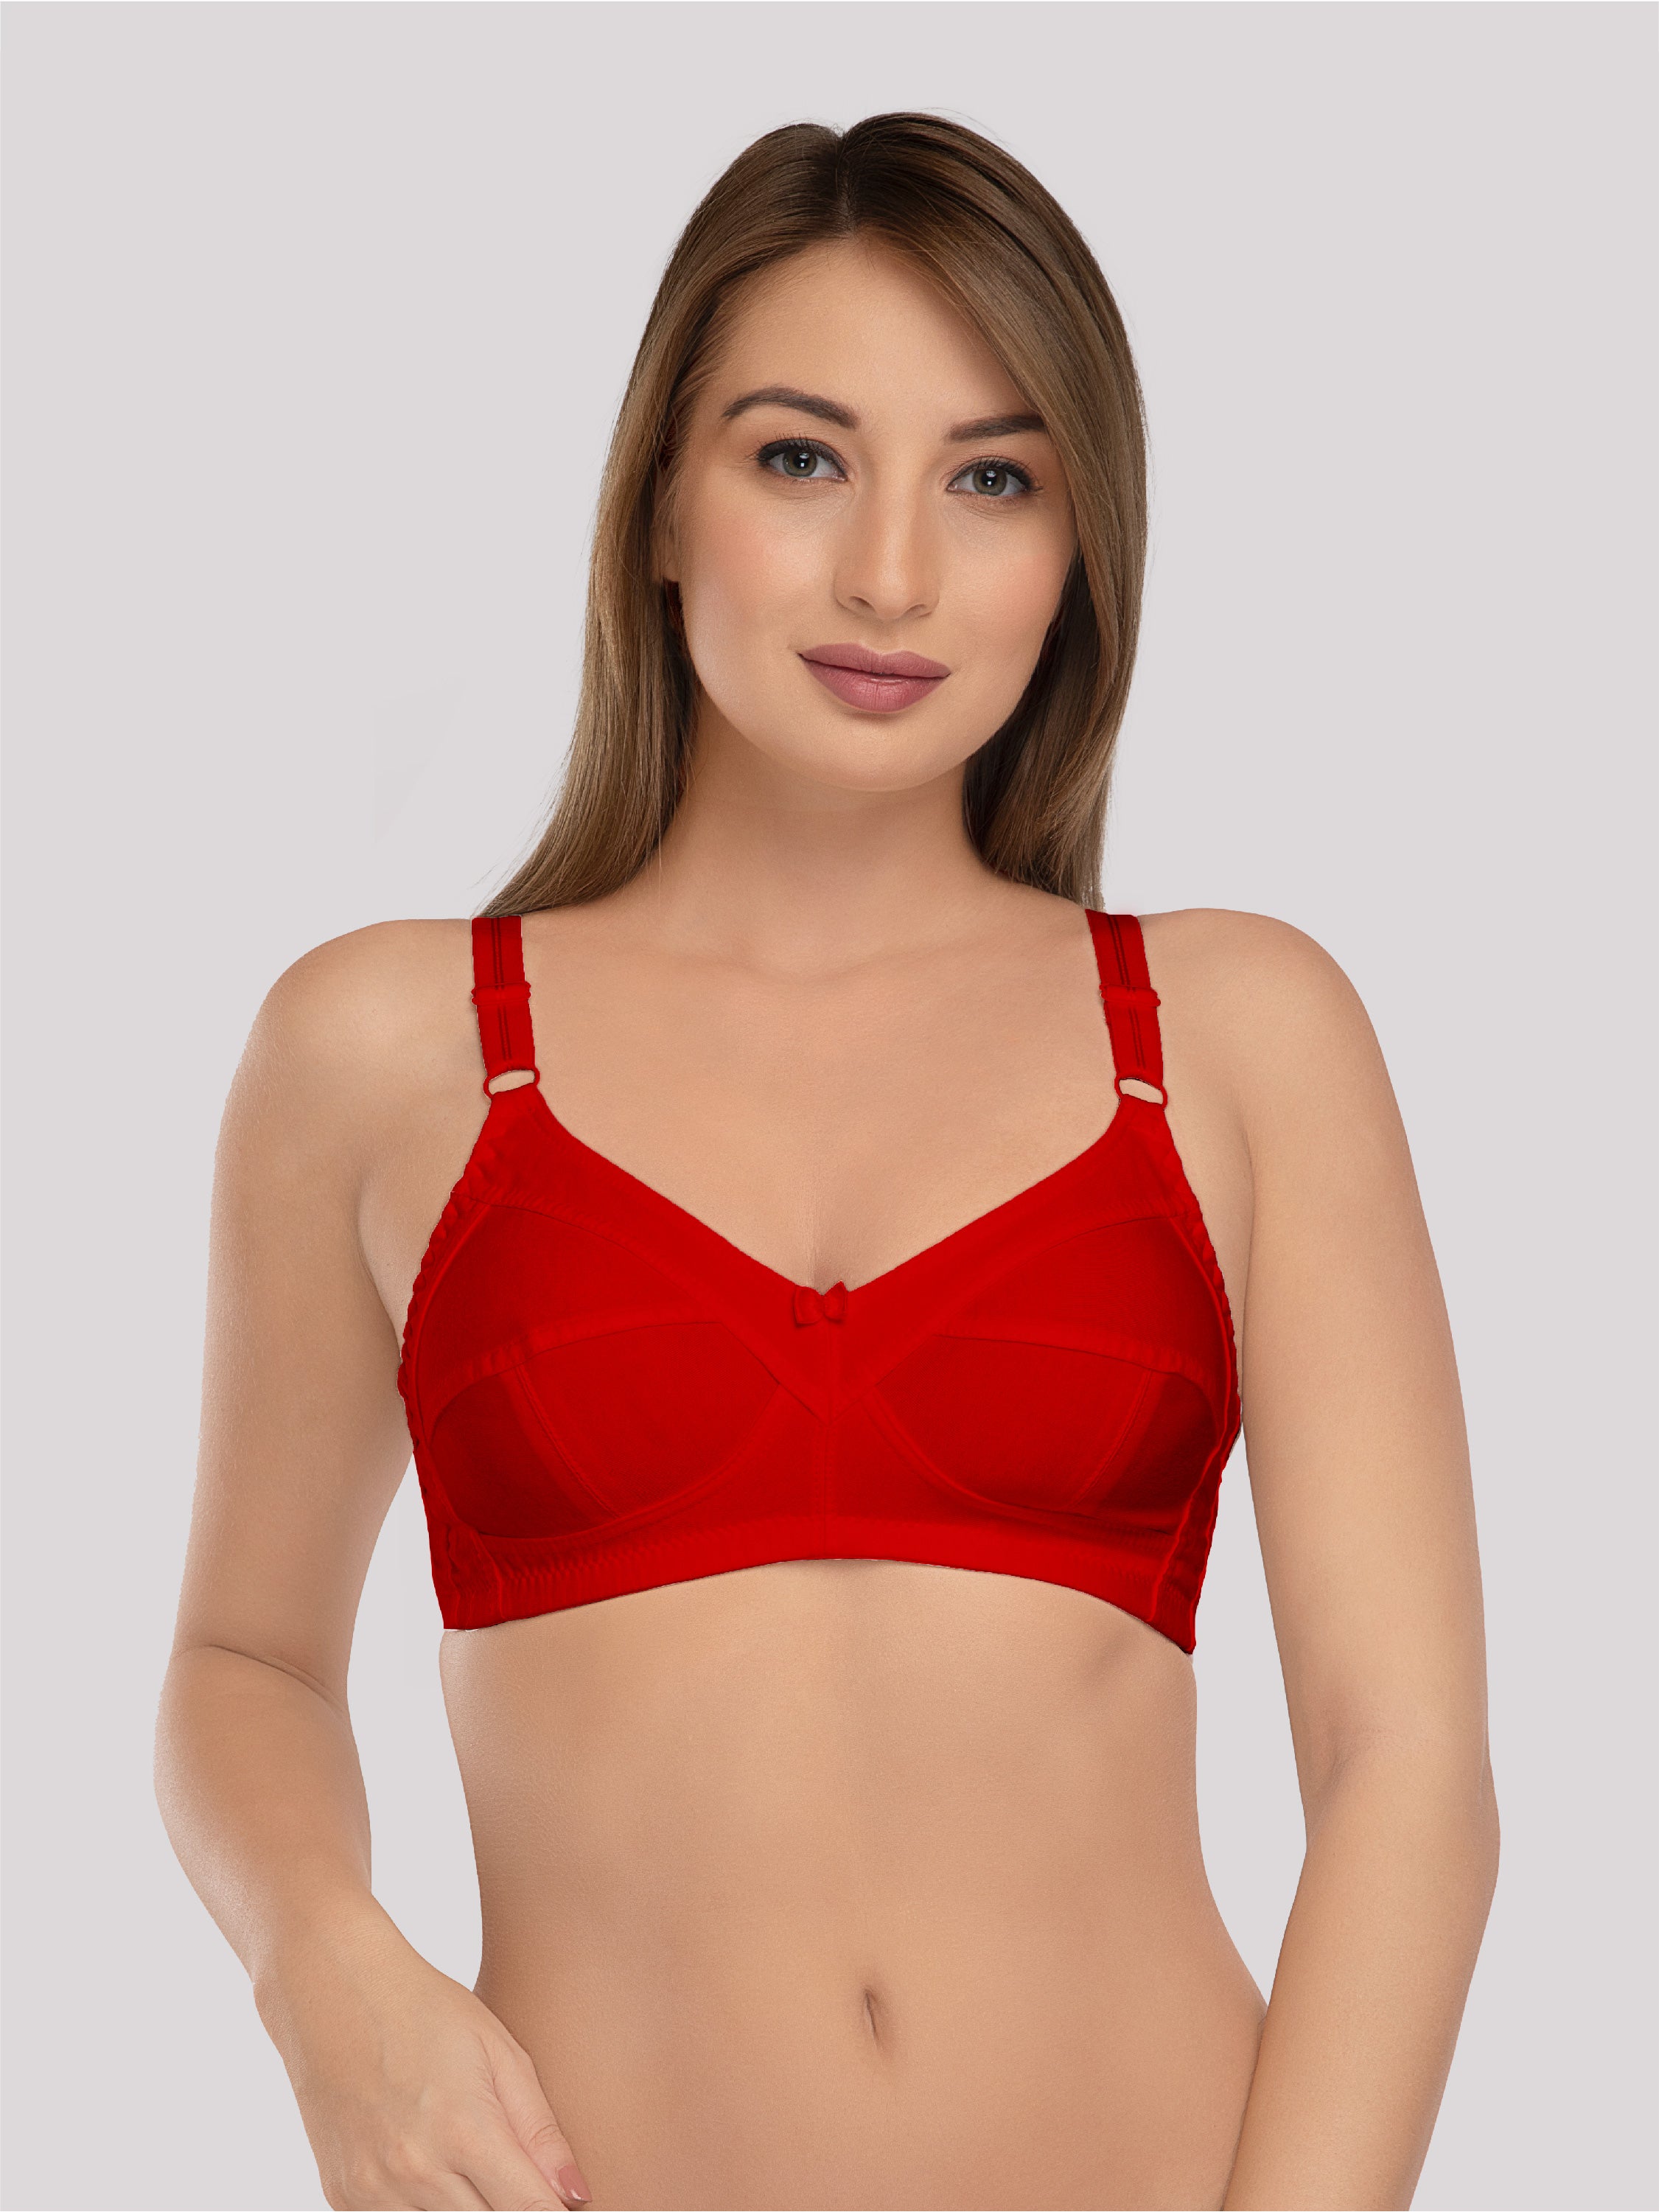 Daisy Dee Red Non Padded Non Wired Full Coverage Bra NSHPU-Red